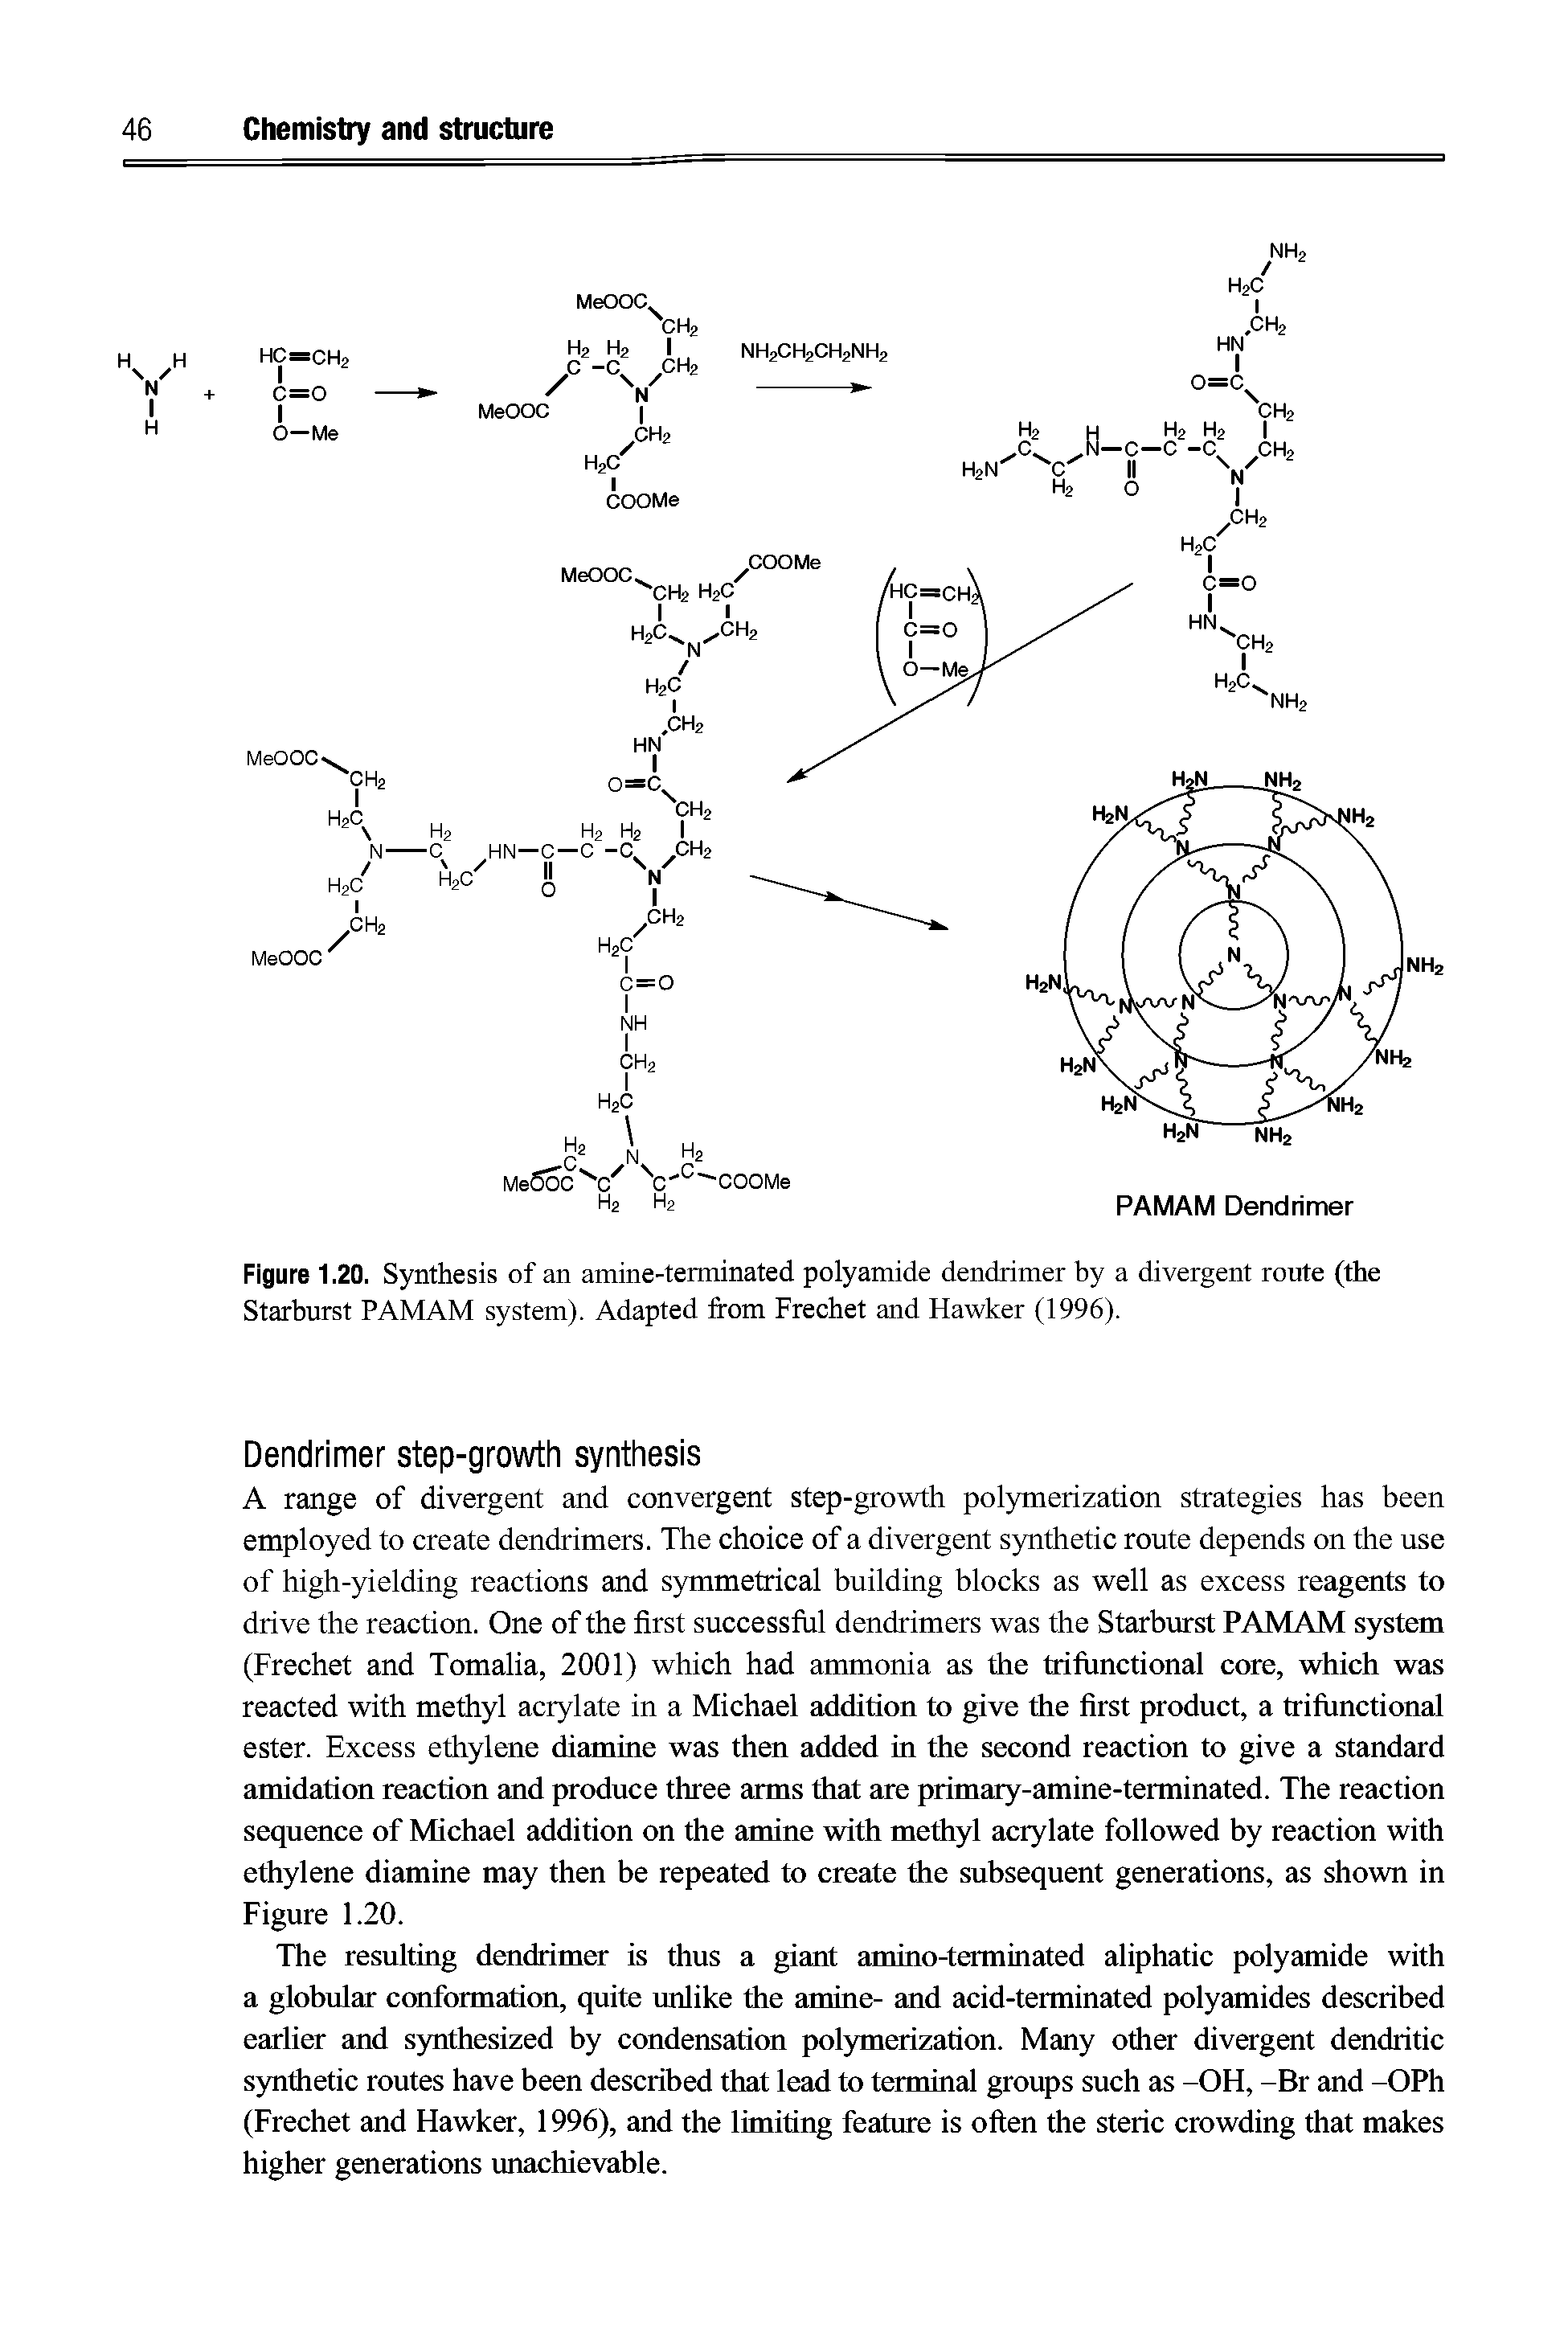 Figure 1.20. Synthesis of an amine-terminated polyamide dendrimer by a divergent route (the Starburst PAMAM system). Adapted from Frechet and Hawker (1996).